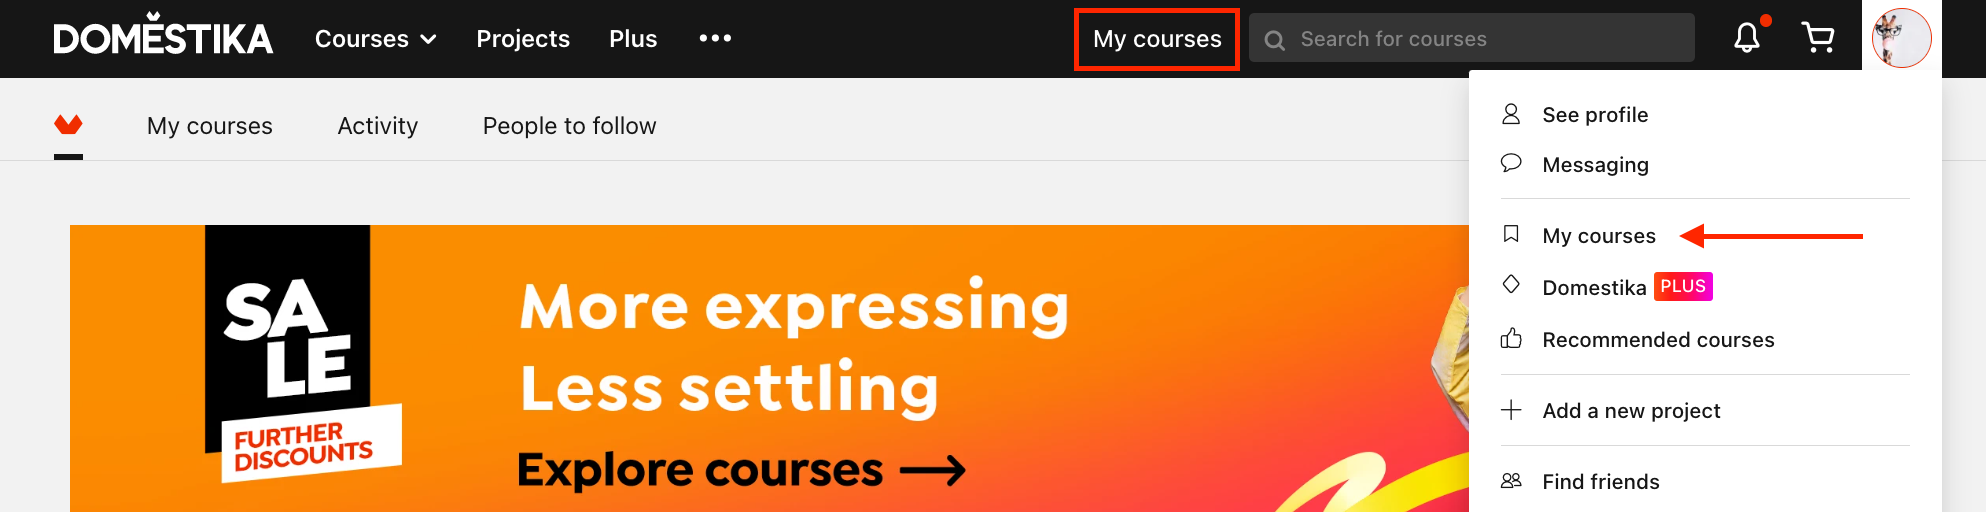 EN_My_courses_section.png